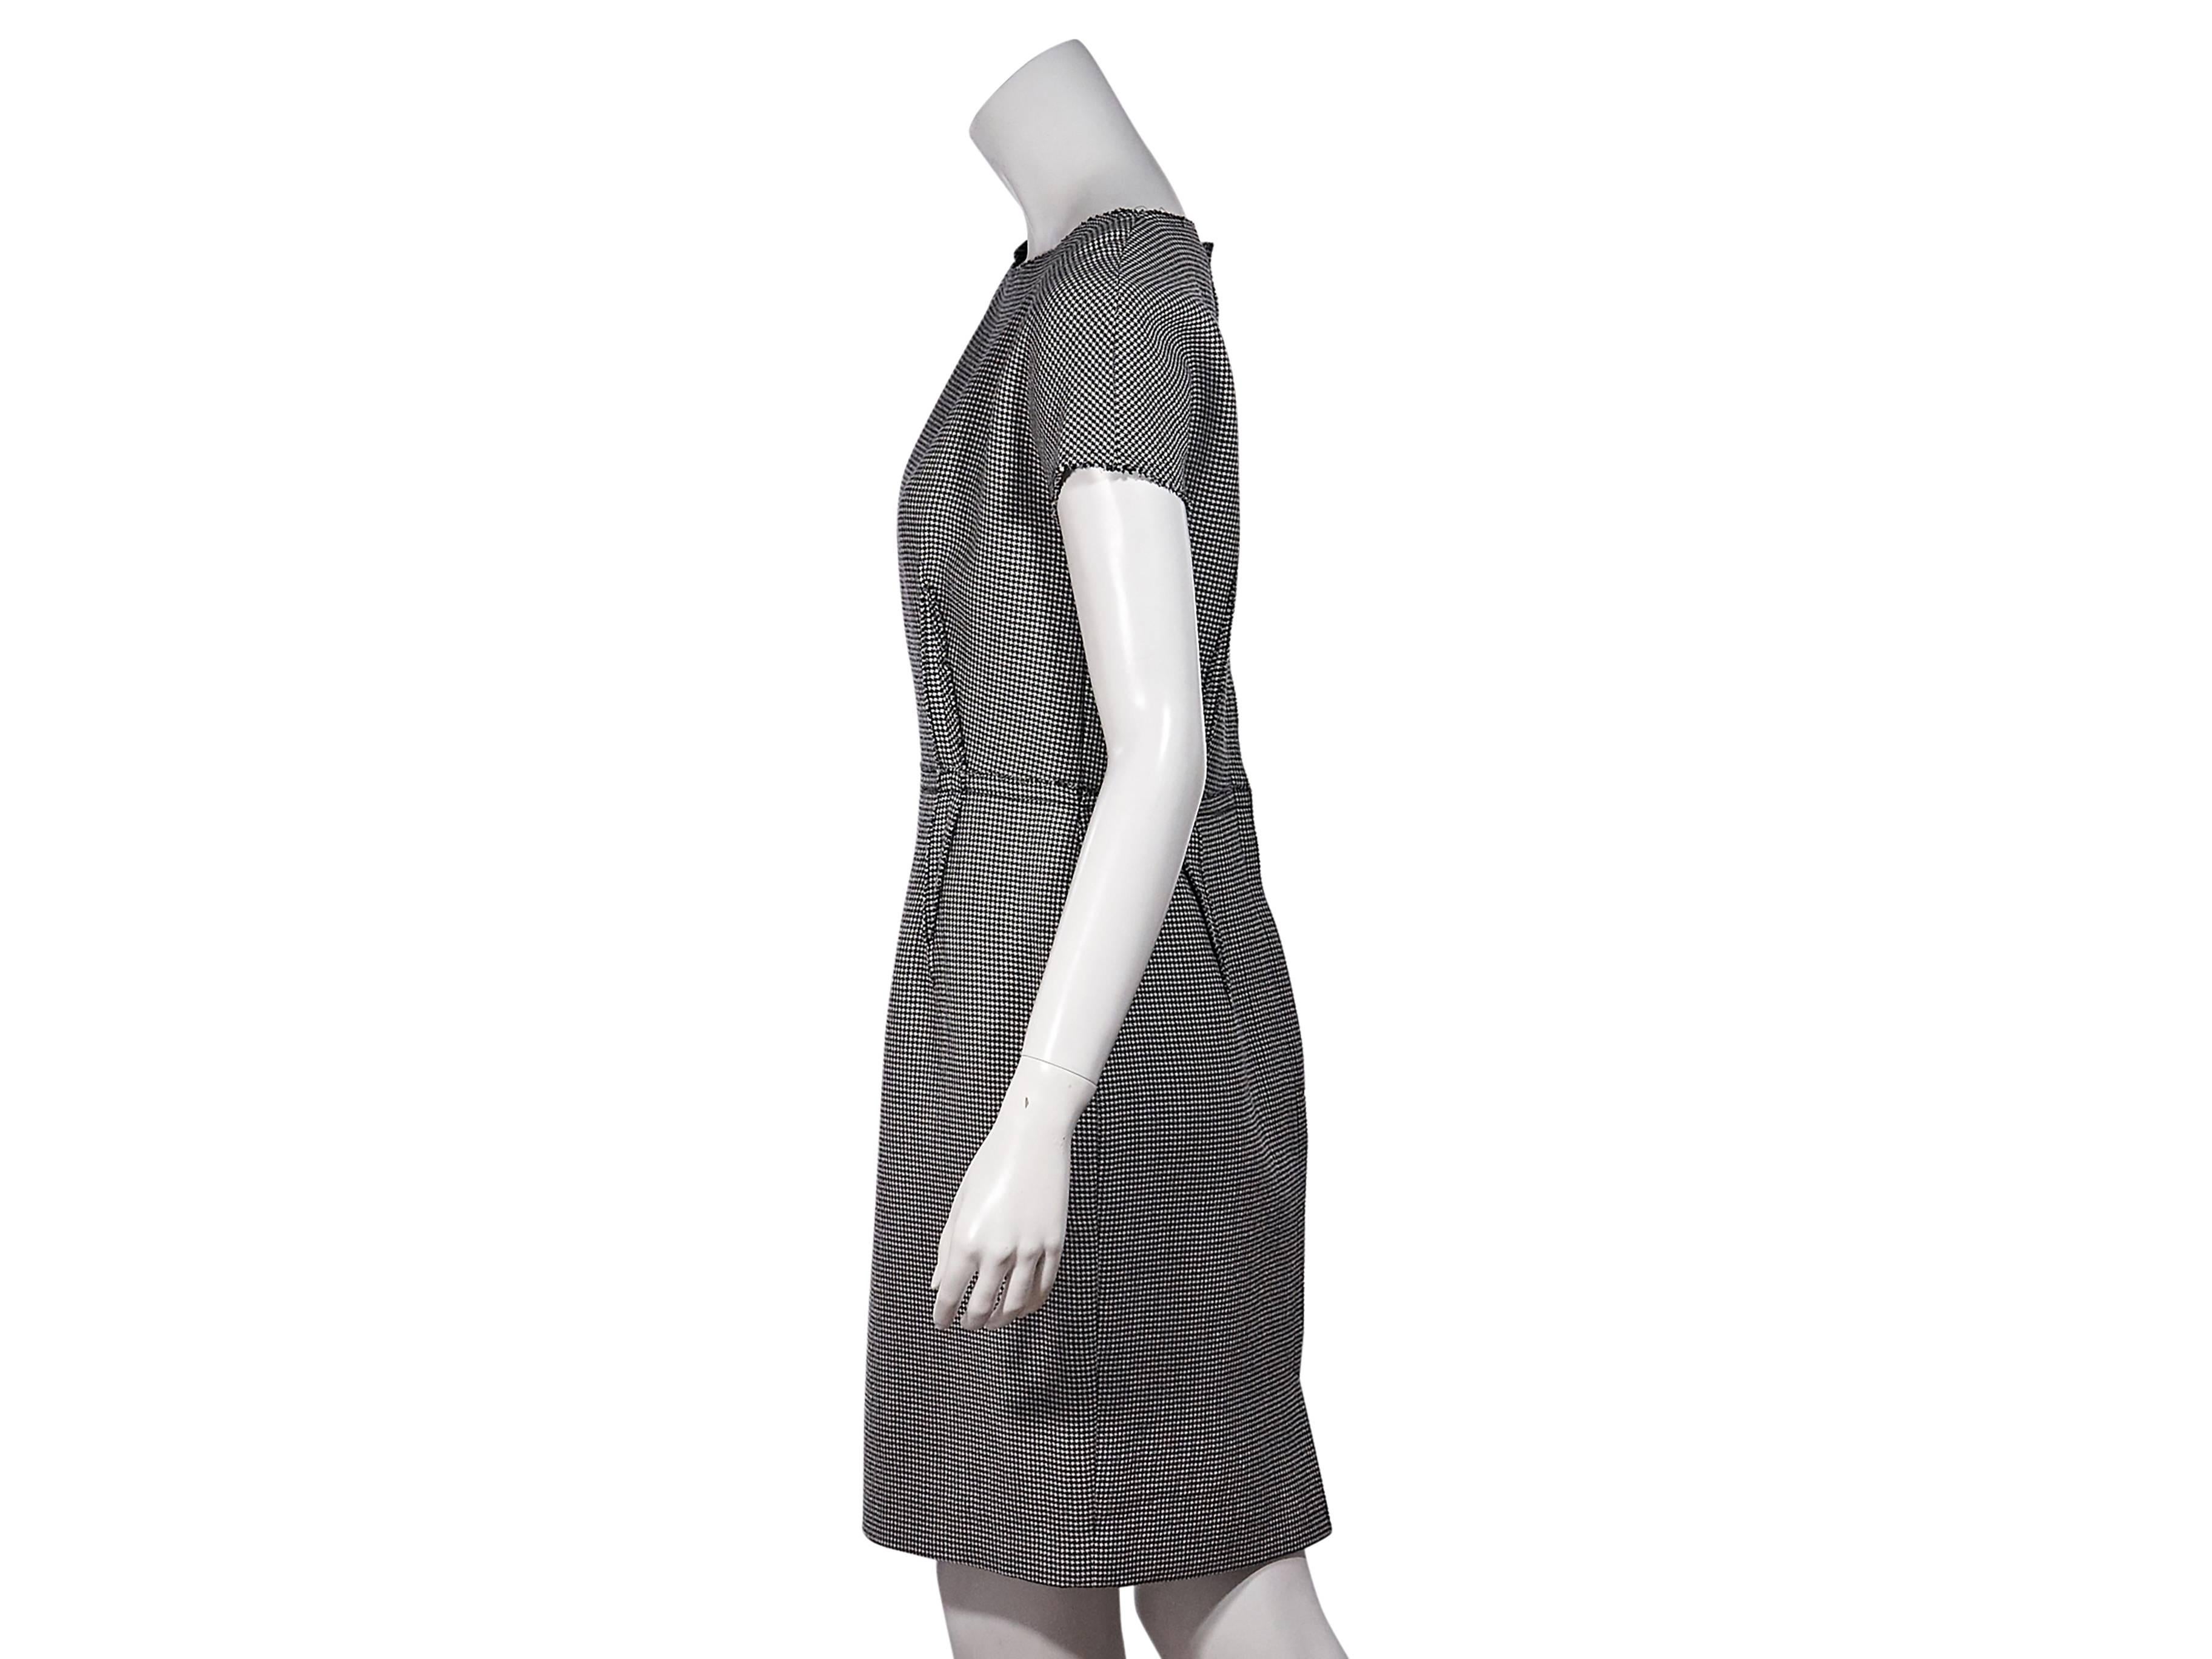 Product details: Black and white micro-houndstooth dress by Lanvin. Features and inside-out construction. Boat neck. Short sleeves. Concealed back zip closure. Back hem vent. Label size FR 40. 
Condition: Excellent. 
Est. Retail $ 528.00